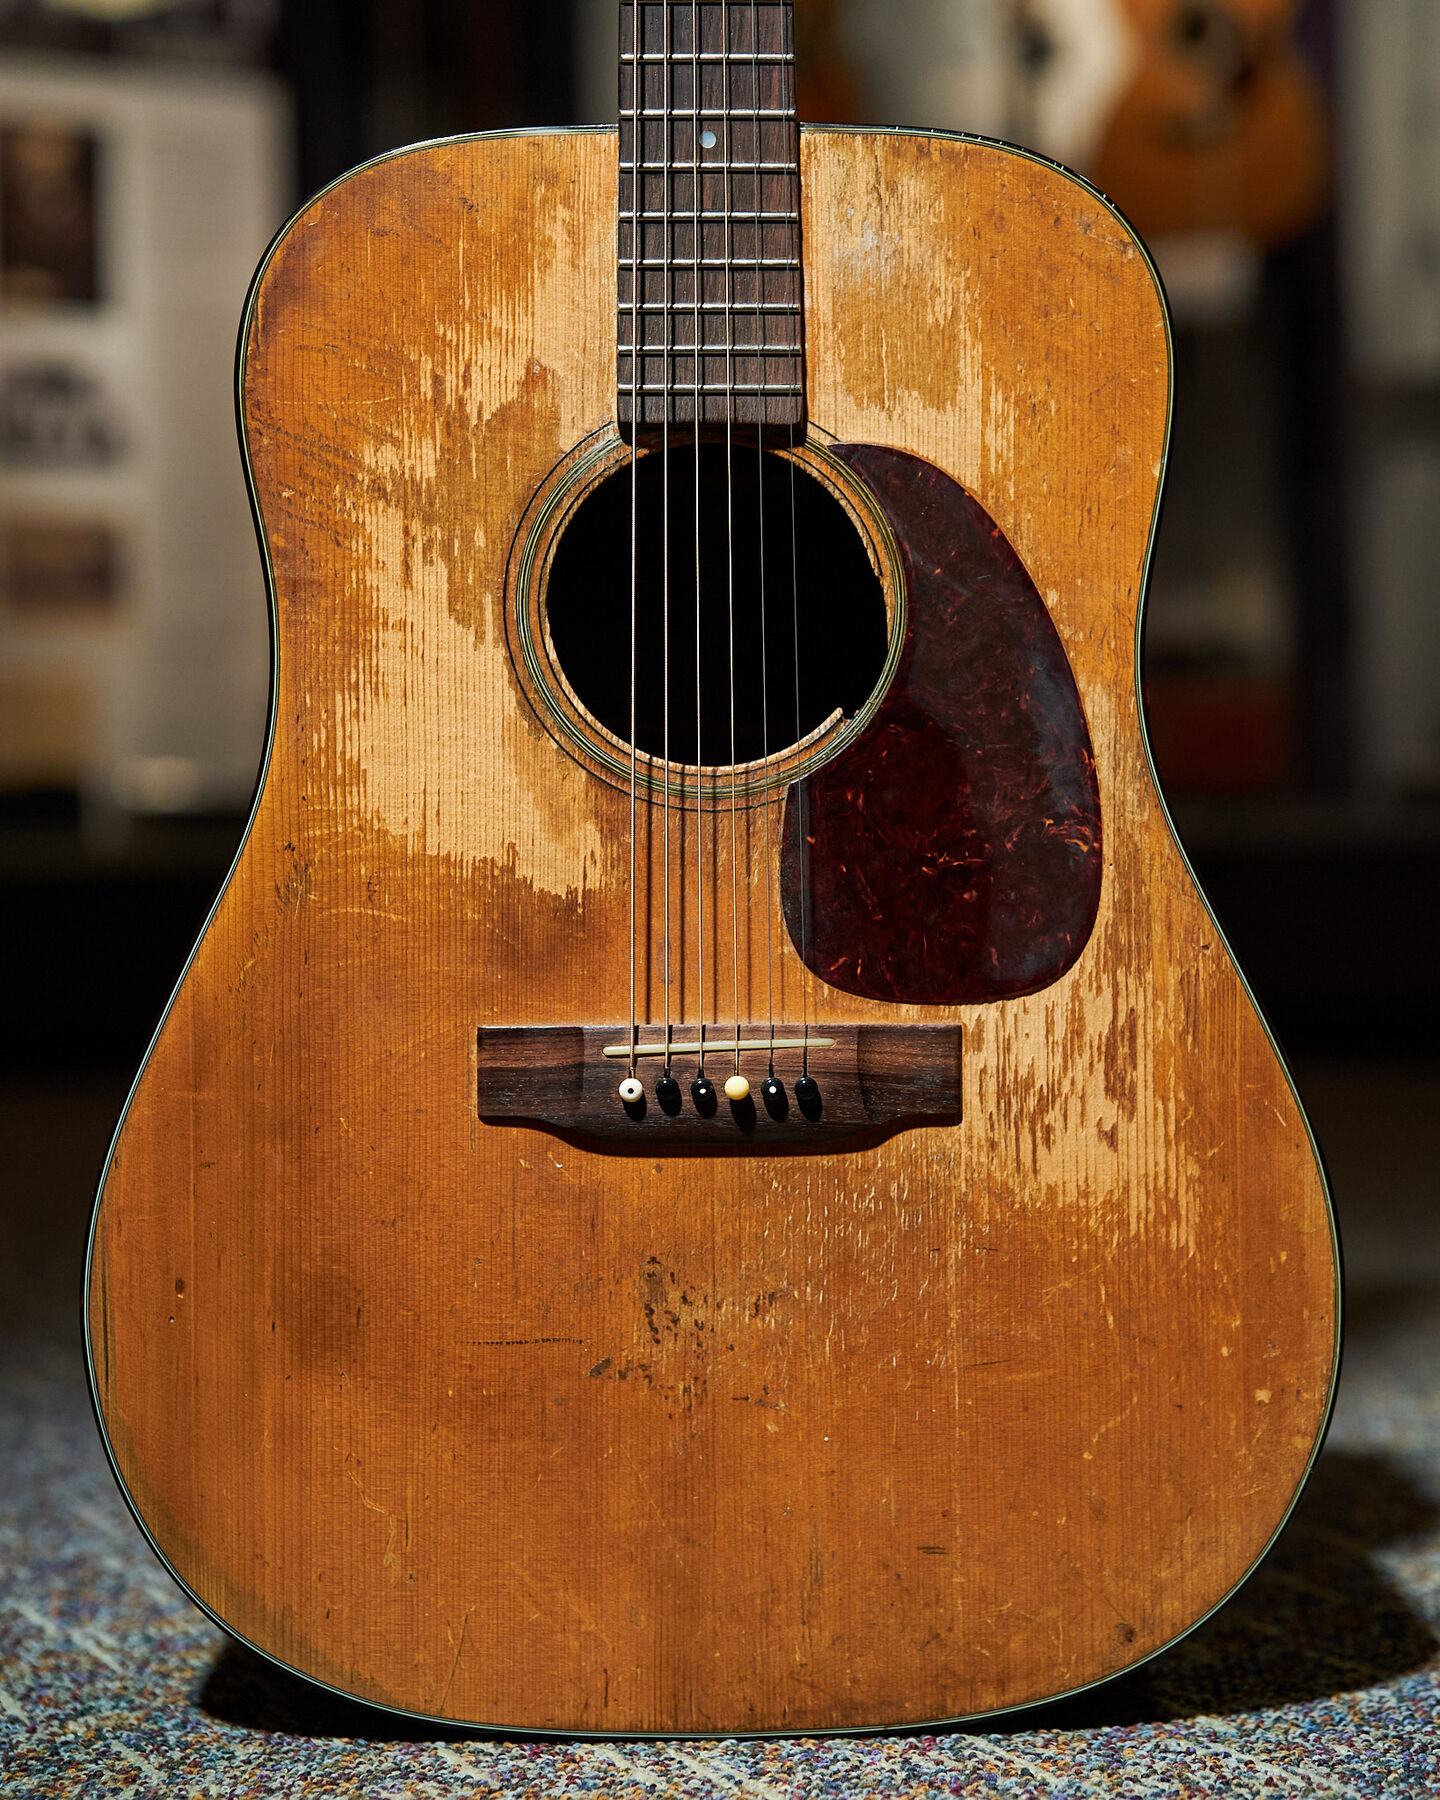 Shot of the body of a well-worn D-18 acoustic guitar